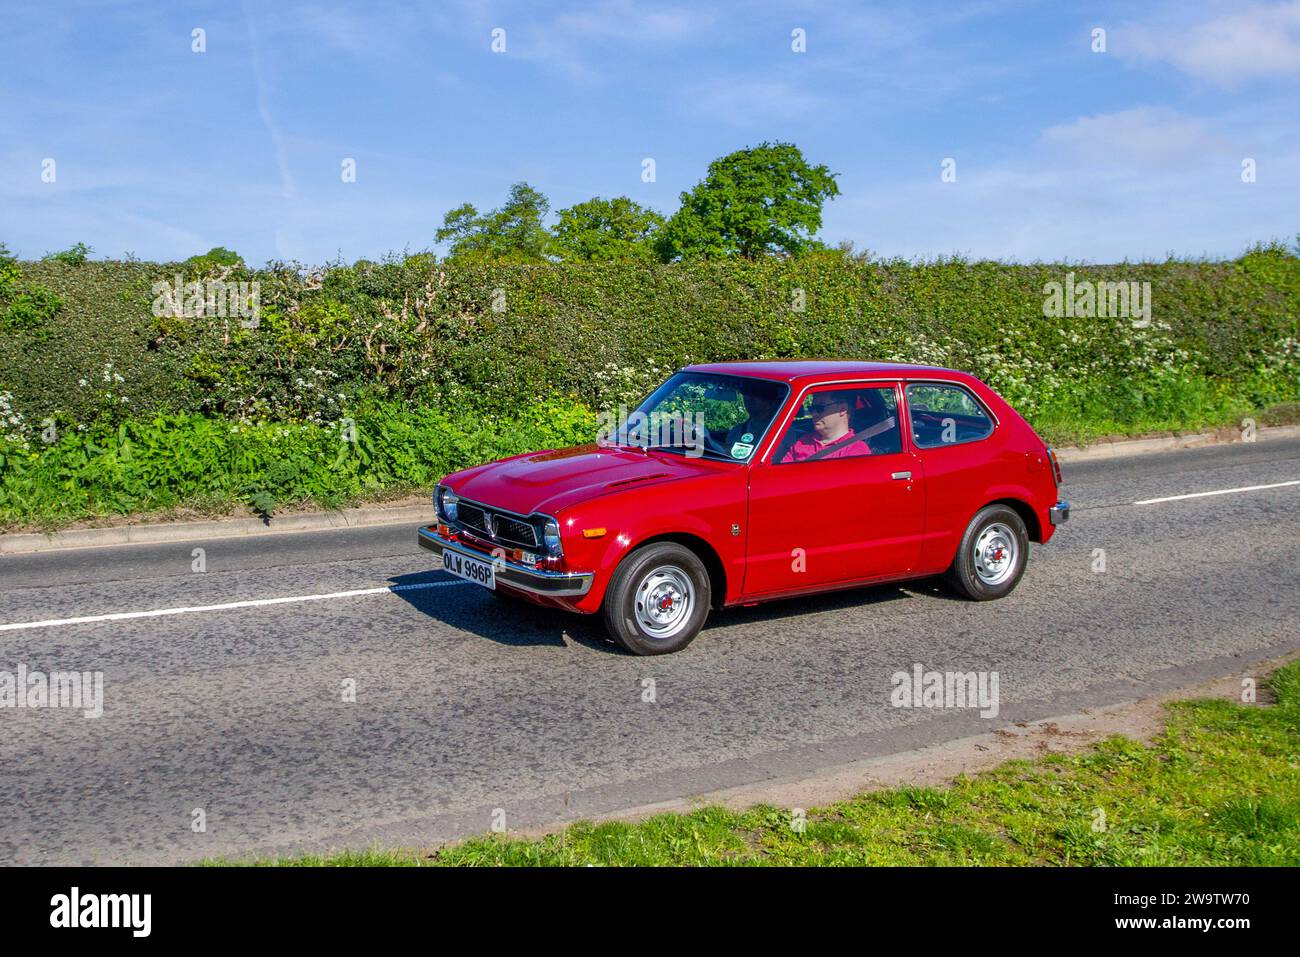 Rare 1976 70s seventies Red Honda Civic 3D At Auto Car Petrol 1169 cc,  three-door hatchback; Vintage restored classic specialist motors vehicle restoration, automobile collectors, yesteryear motoring enthusiasts and historic veteran cars travelling in Cheshire, UK Stock Photo